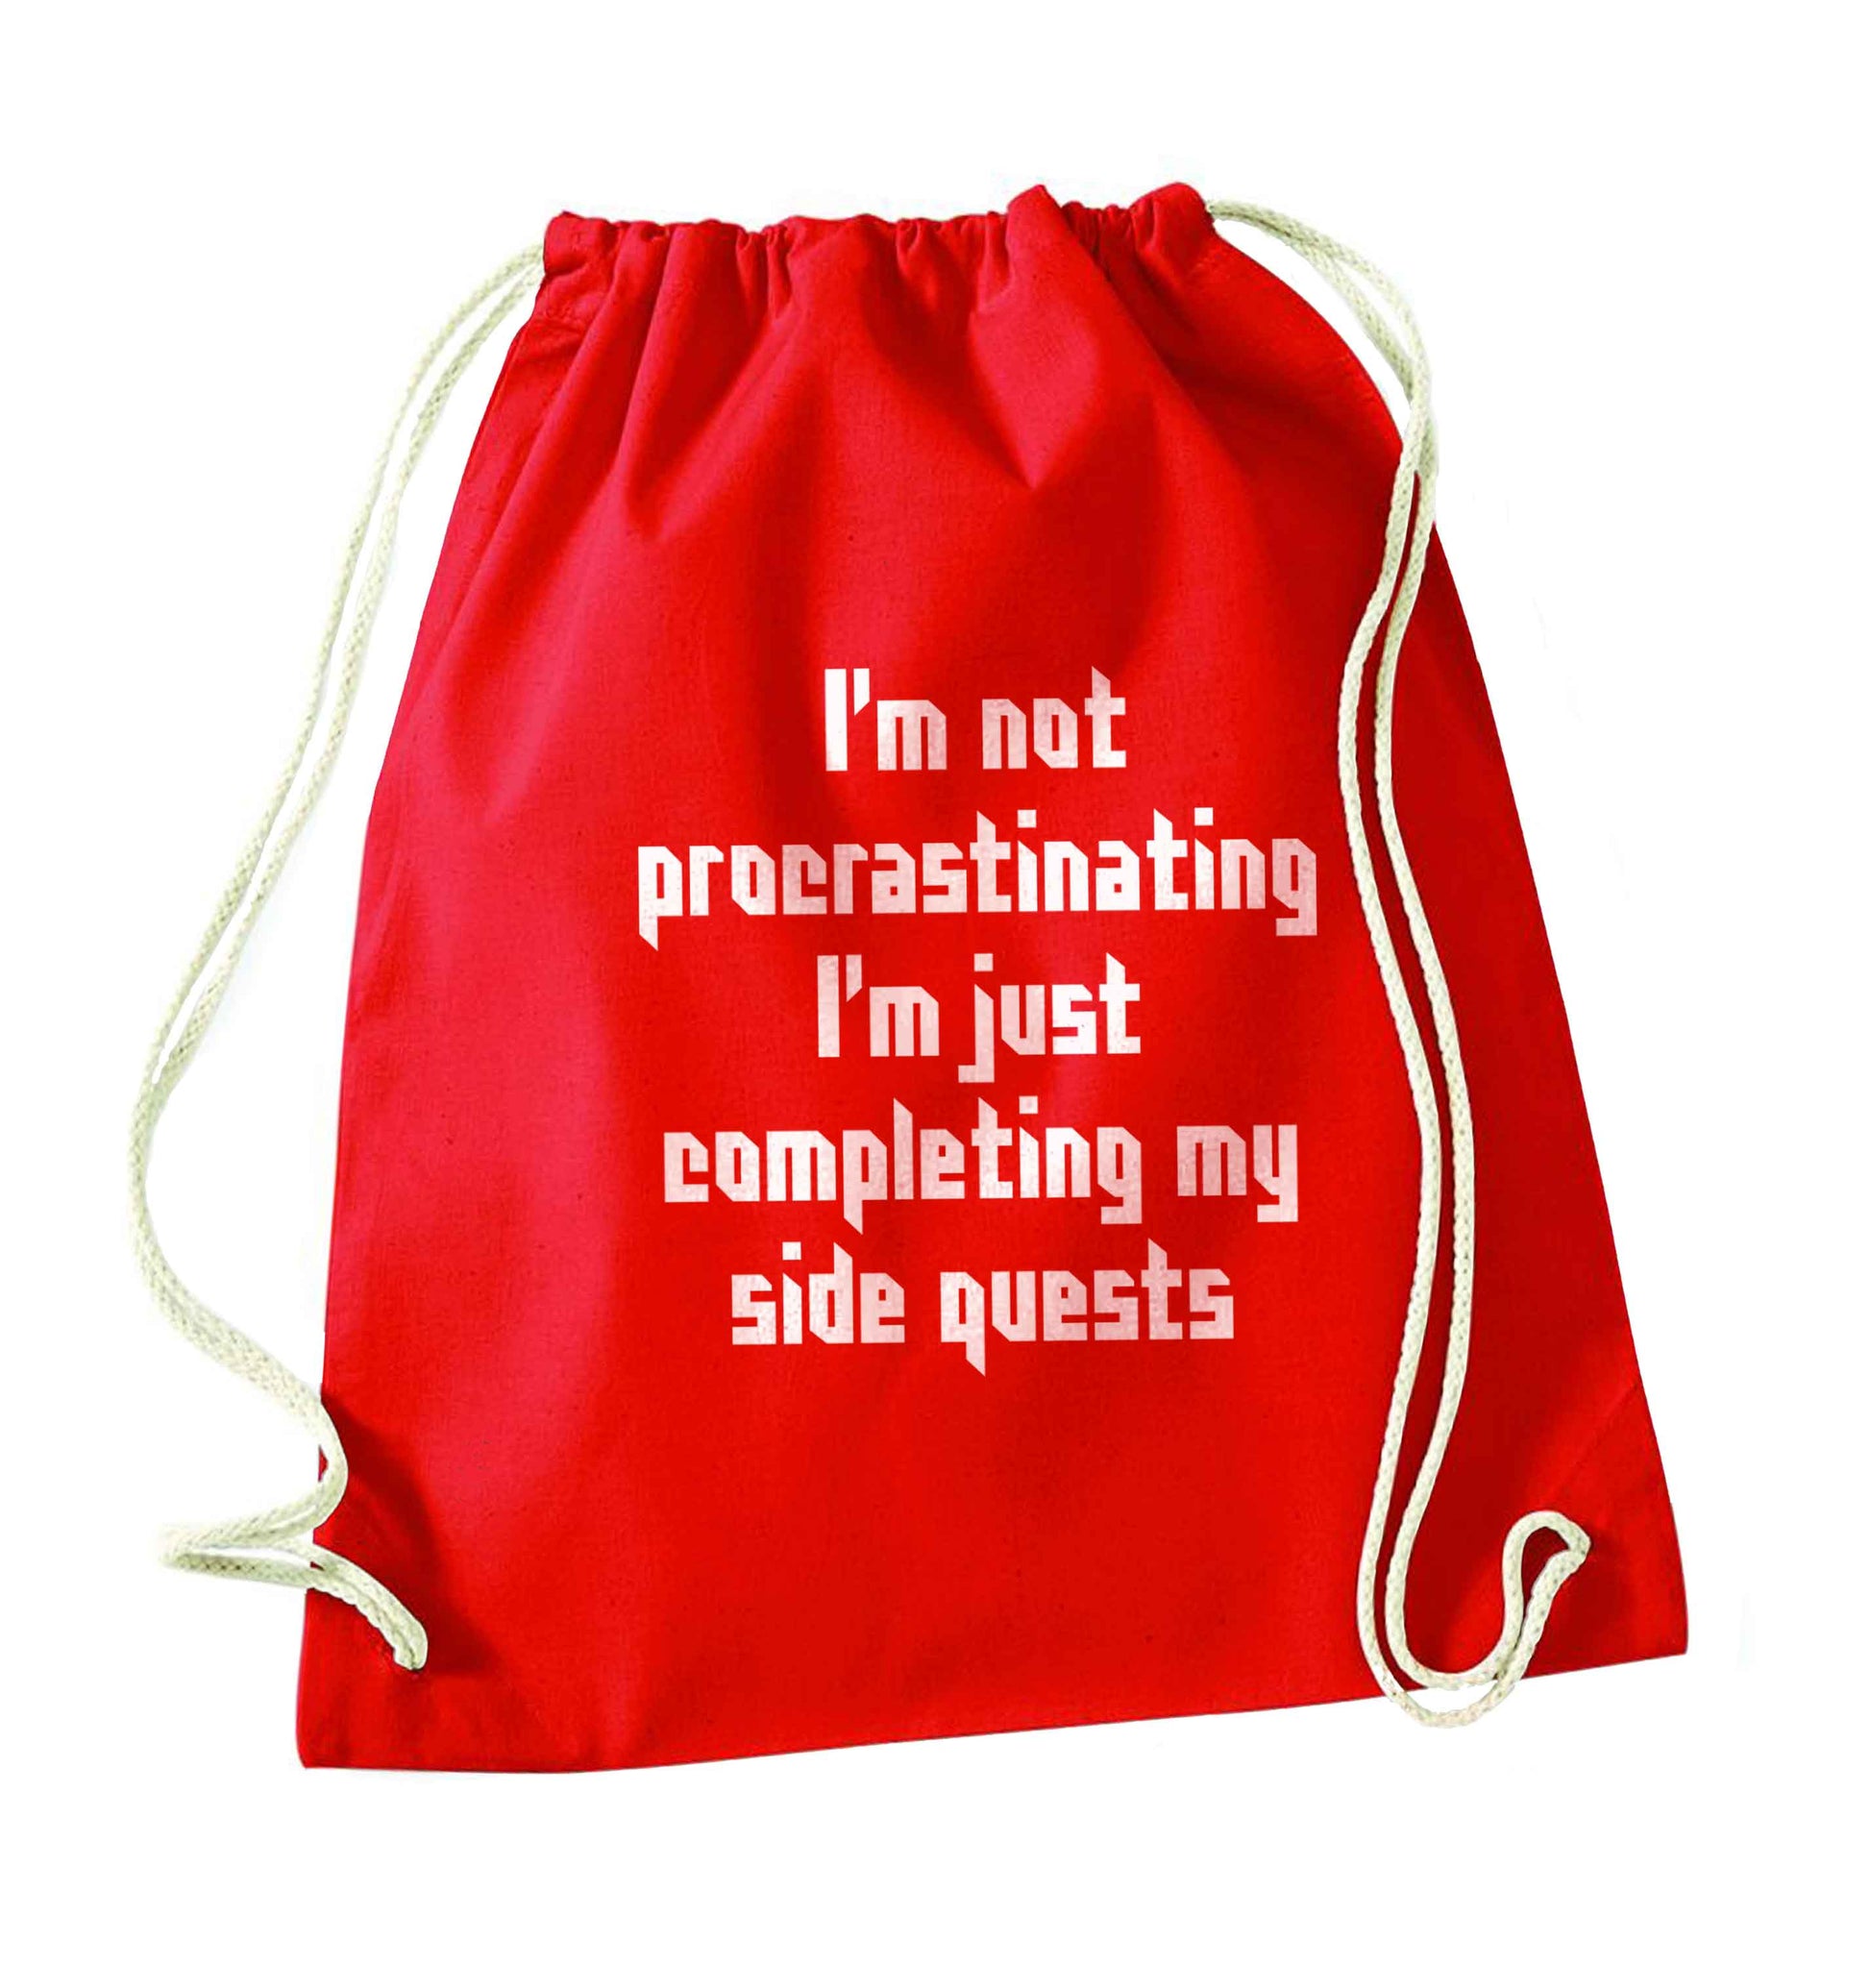 I'm not procrastinating I'm just completing my side quests red drawstring bag 